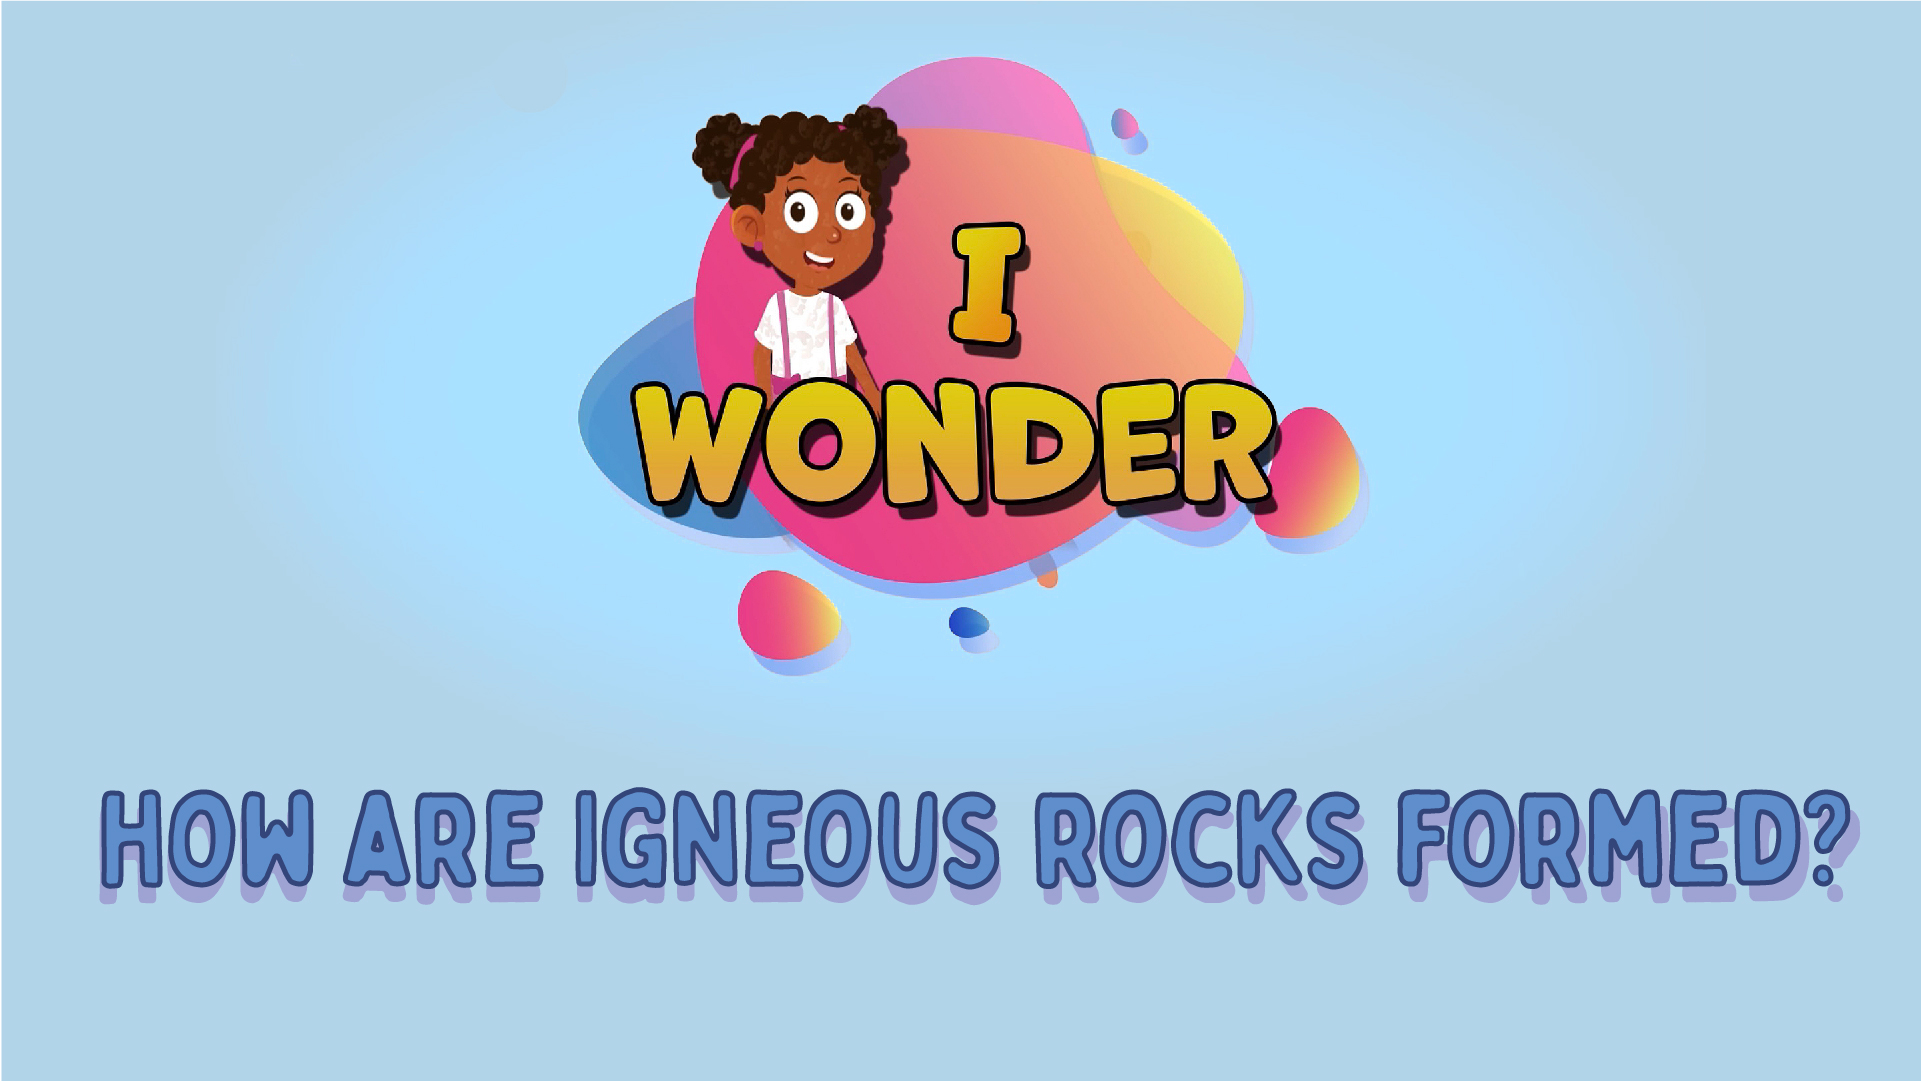 How Are Igneous Rocks Formed?